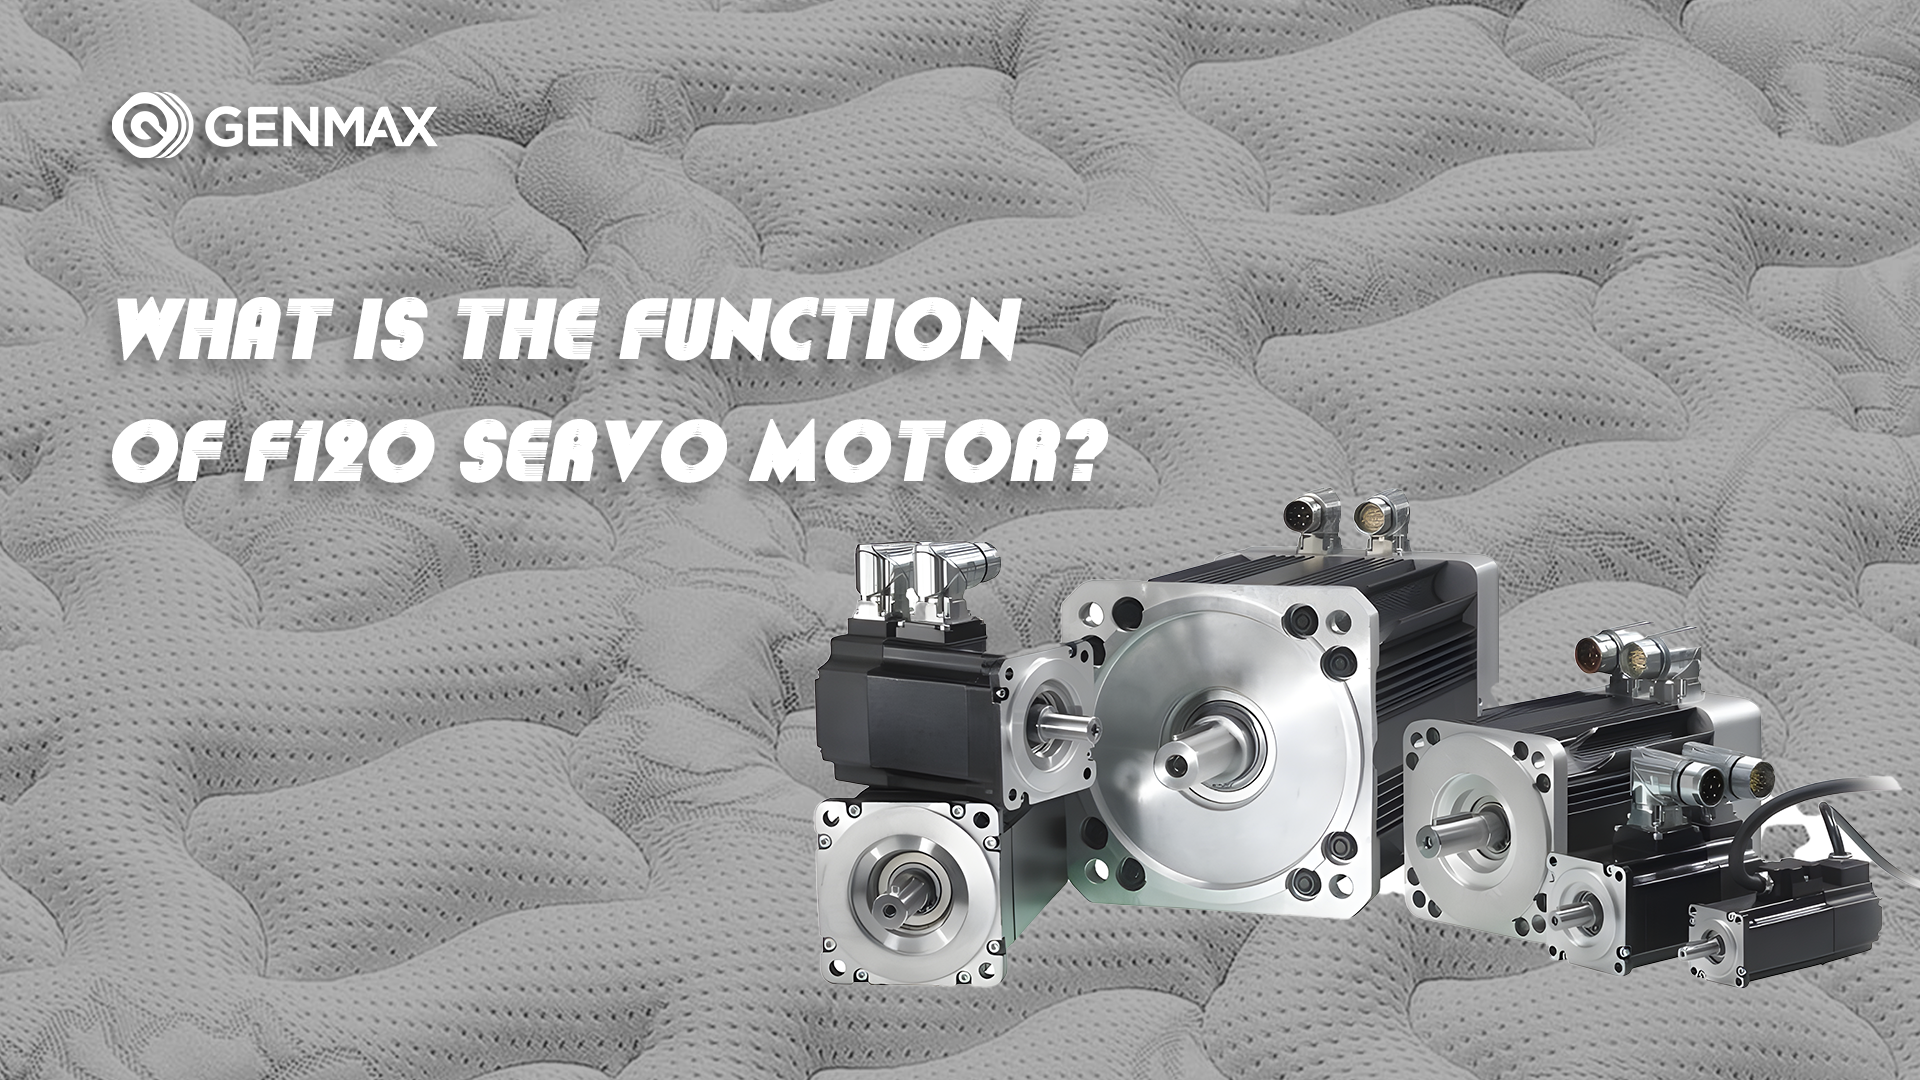 What Is The Function of F120 Servo Motor?